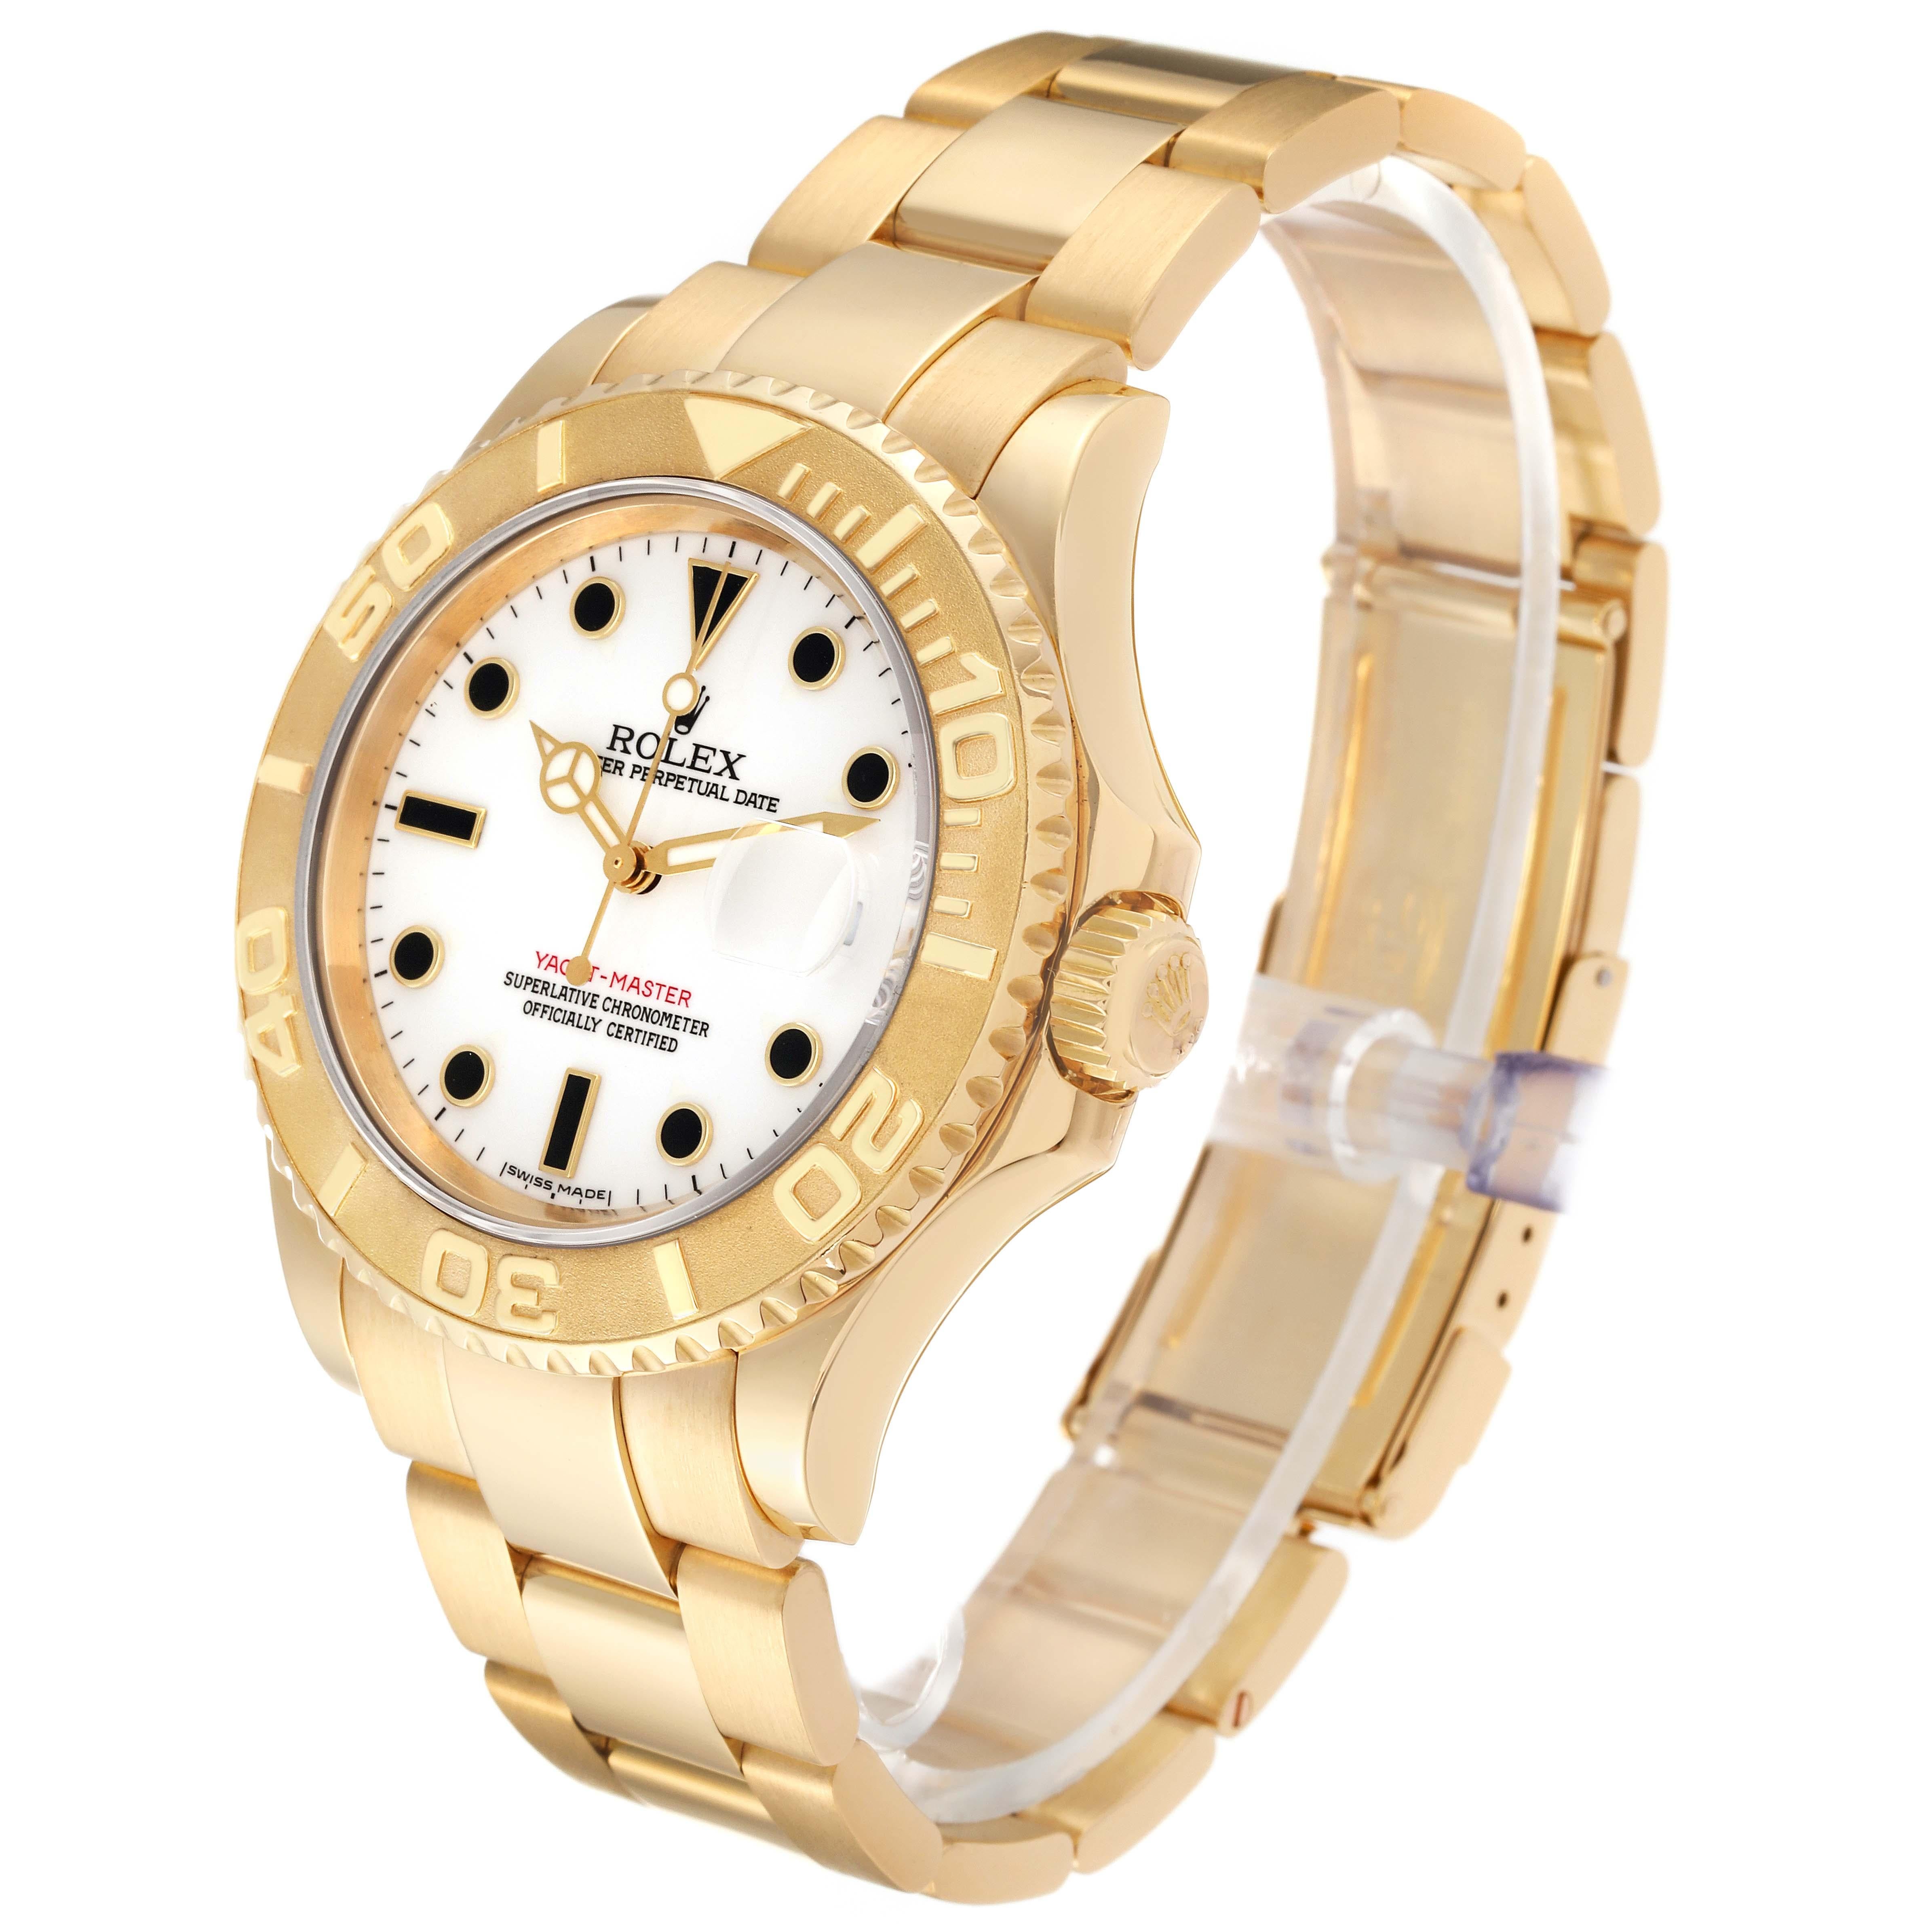 Men's Rolex Yachtmaster 40mm Yellow Gold White Dial Mens Watch 16628 Box Papers